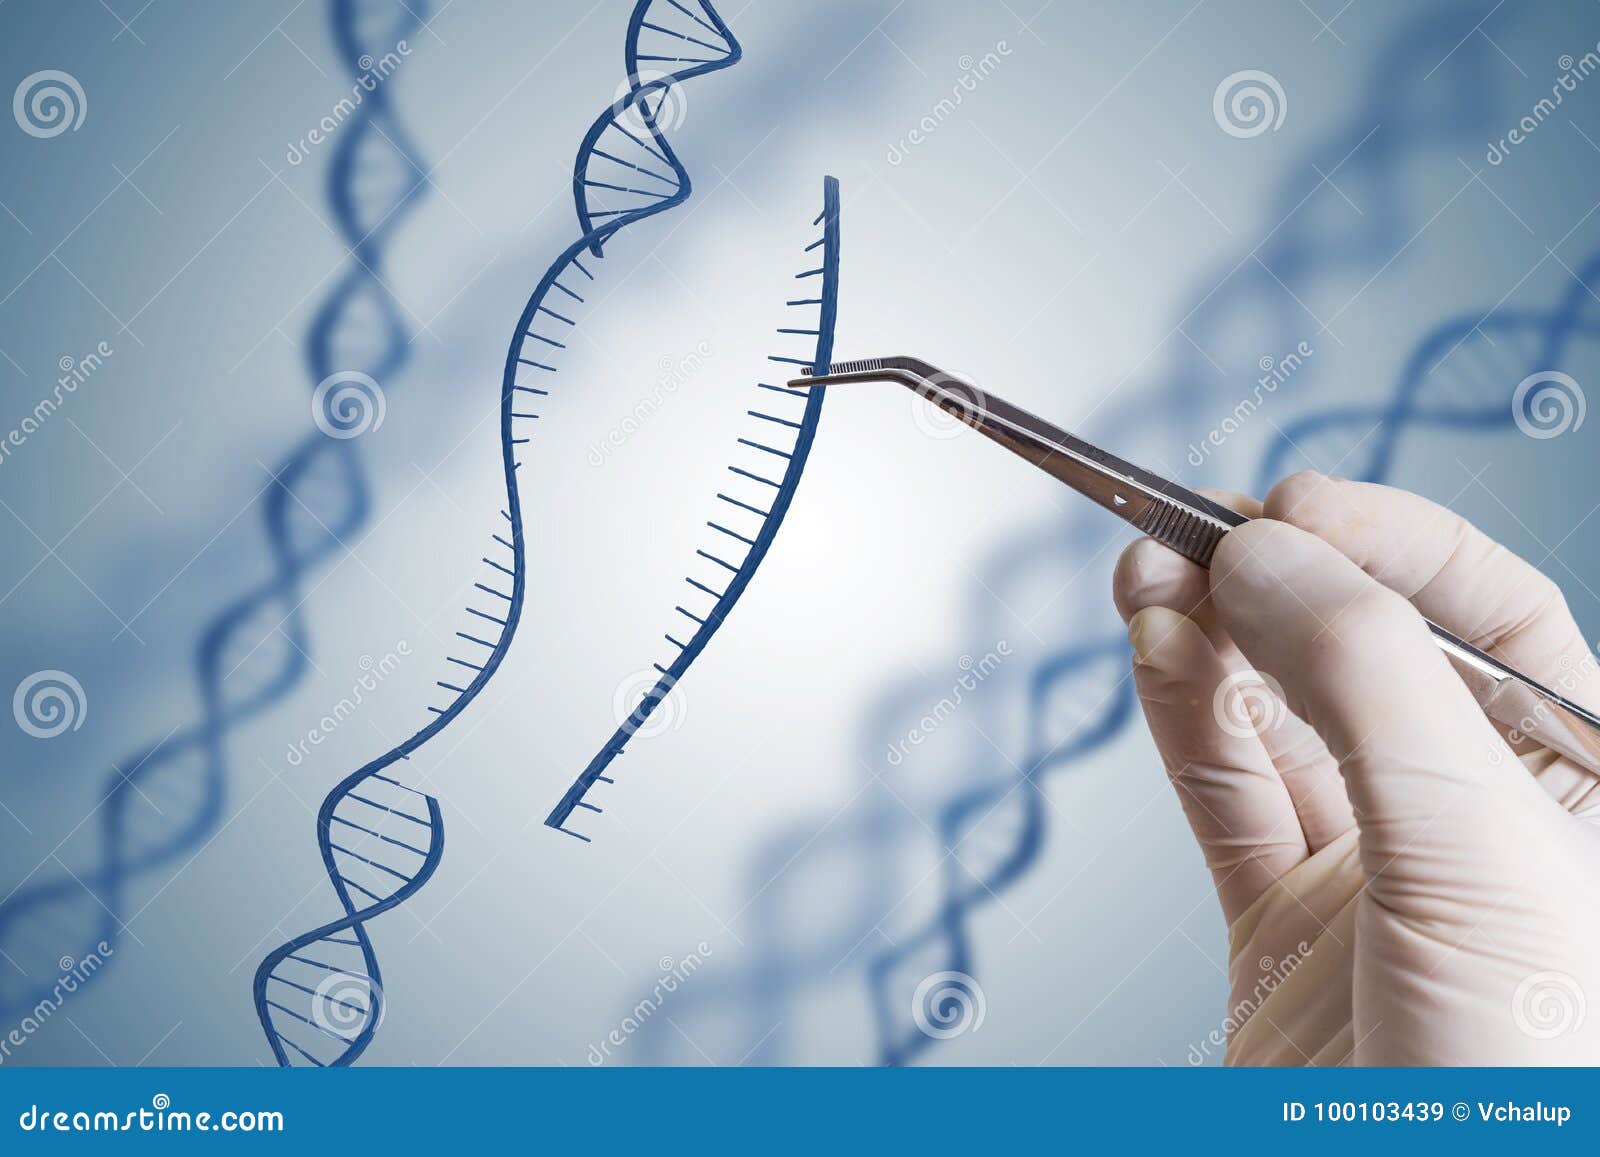 genetic engineering, gmo and gene manipulation concept. hand is inserting sequence of dna